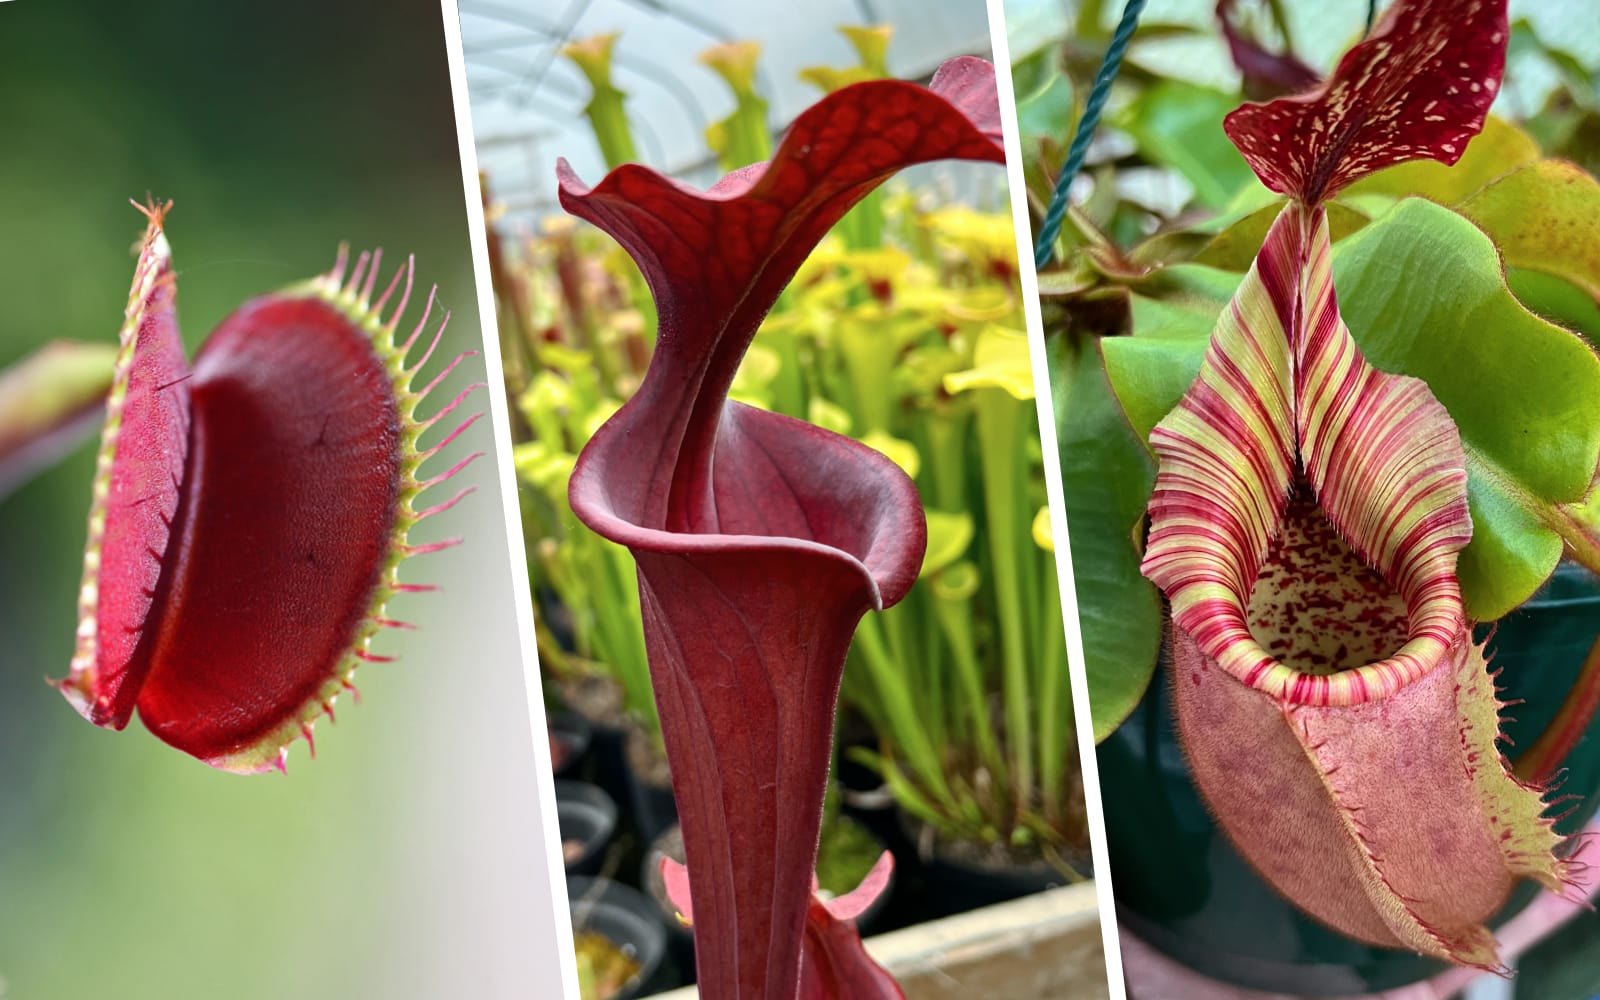 If you've just returned from the garden centre with your first flytrap, or are looking for an easy-to-grow carnivorous plant as a unusual gift, this is for you!